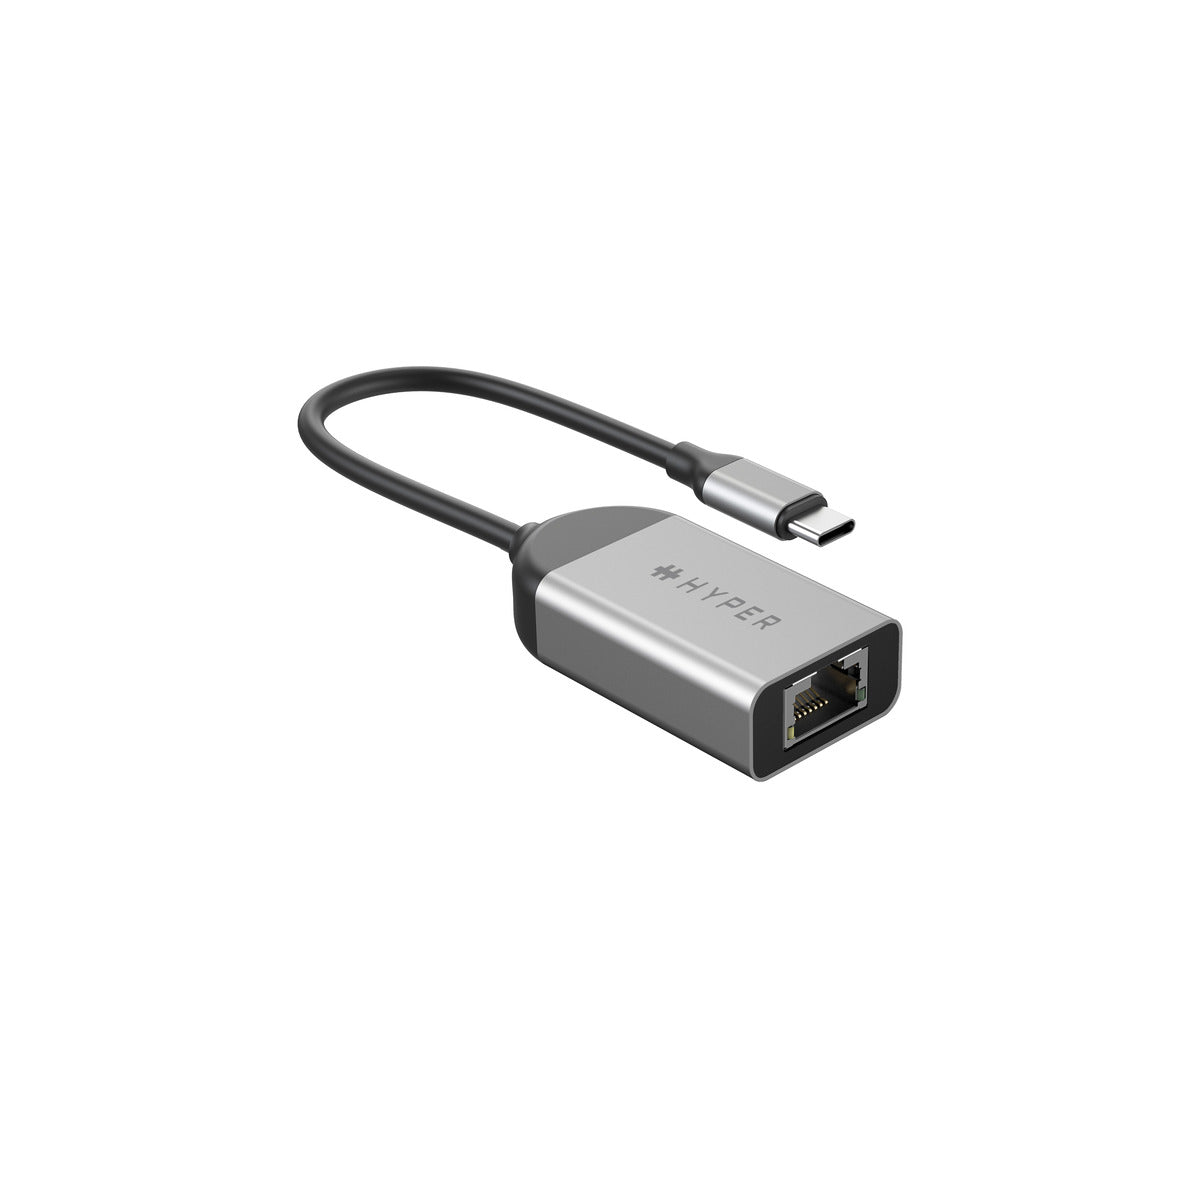 Hyper HyperDrive USB-C To 2.5Gbps Ethernet Adapter